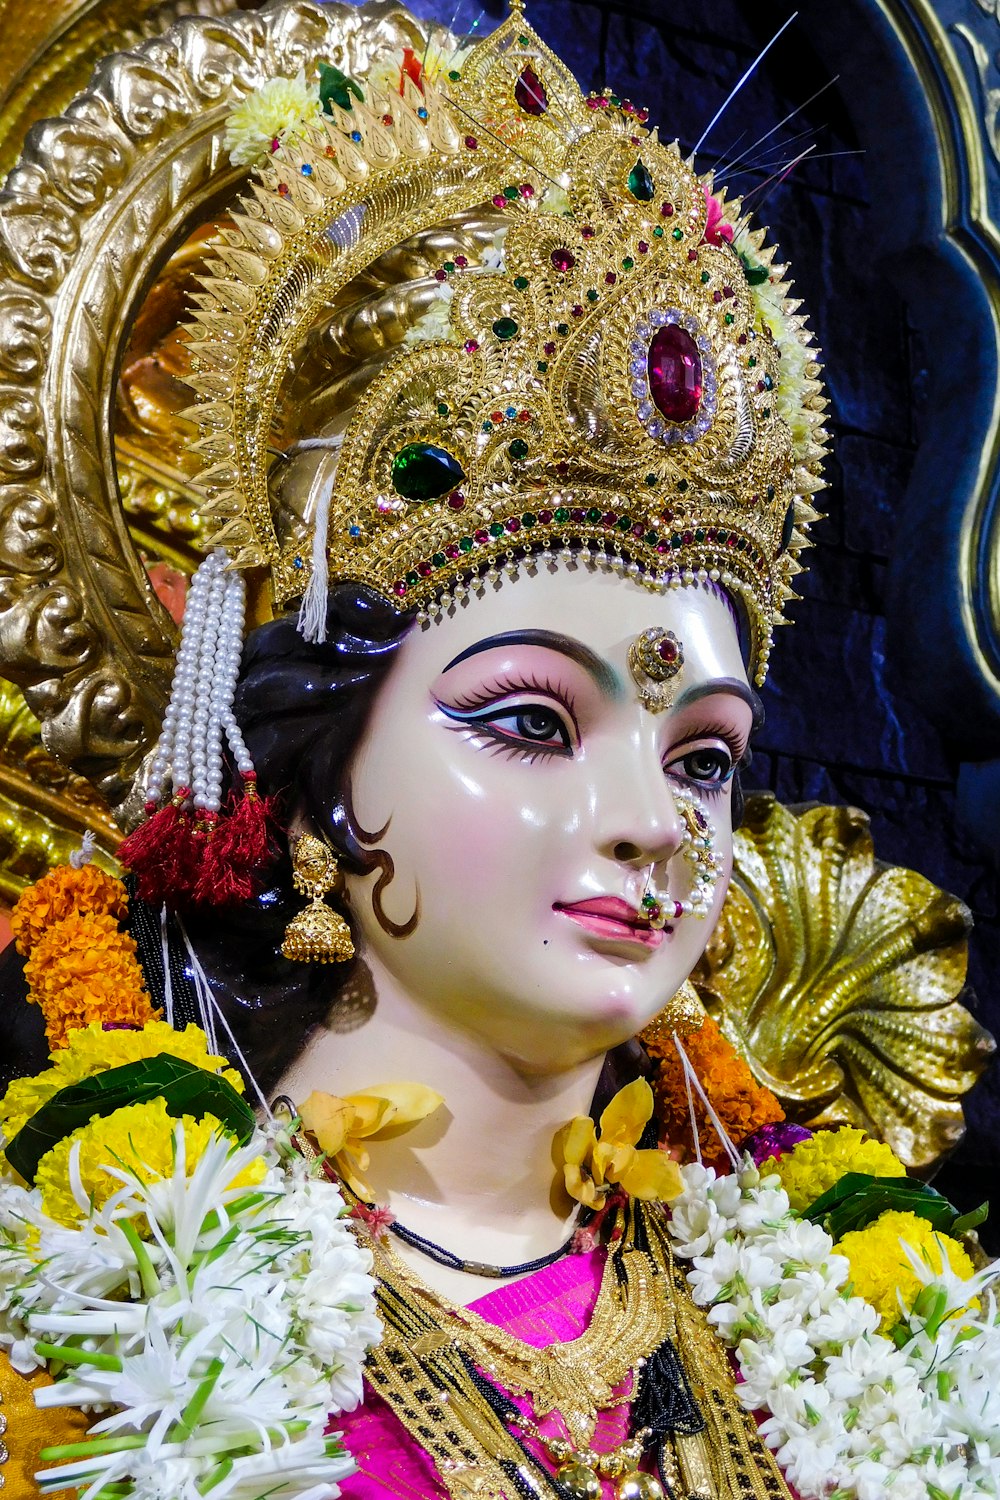 Collection of Extraordinary 999+ Durga Devi Images in Full 4K